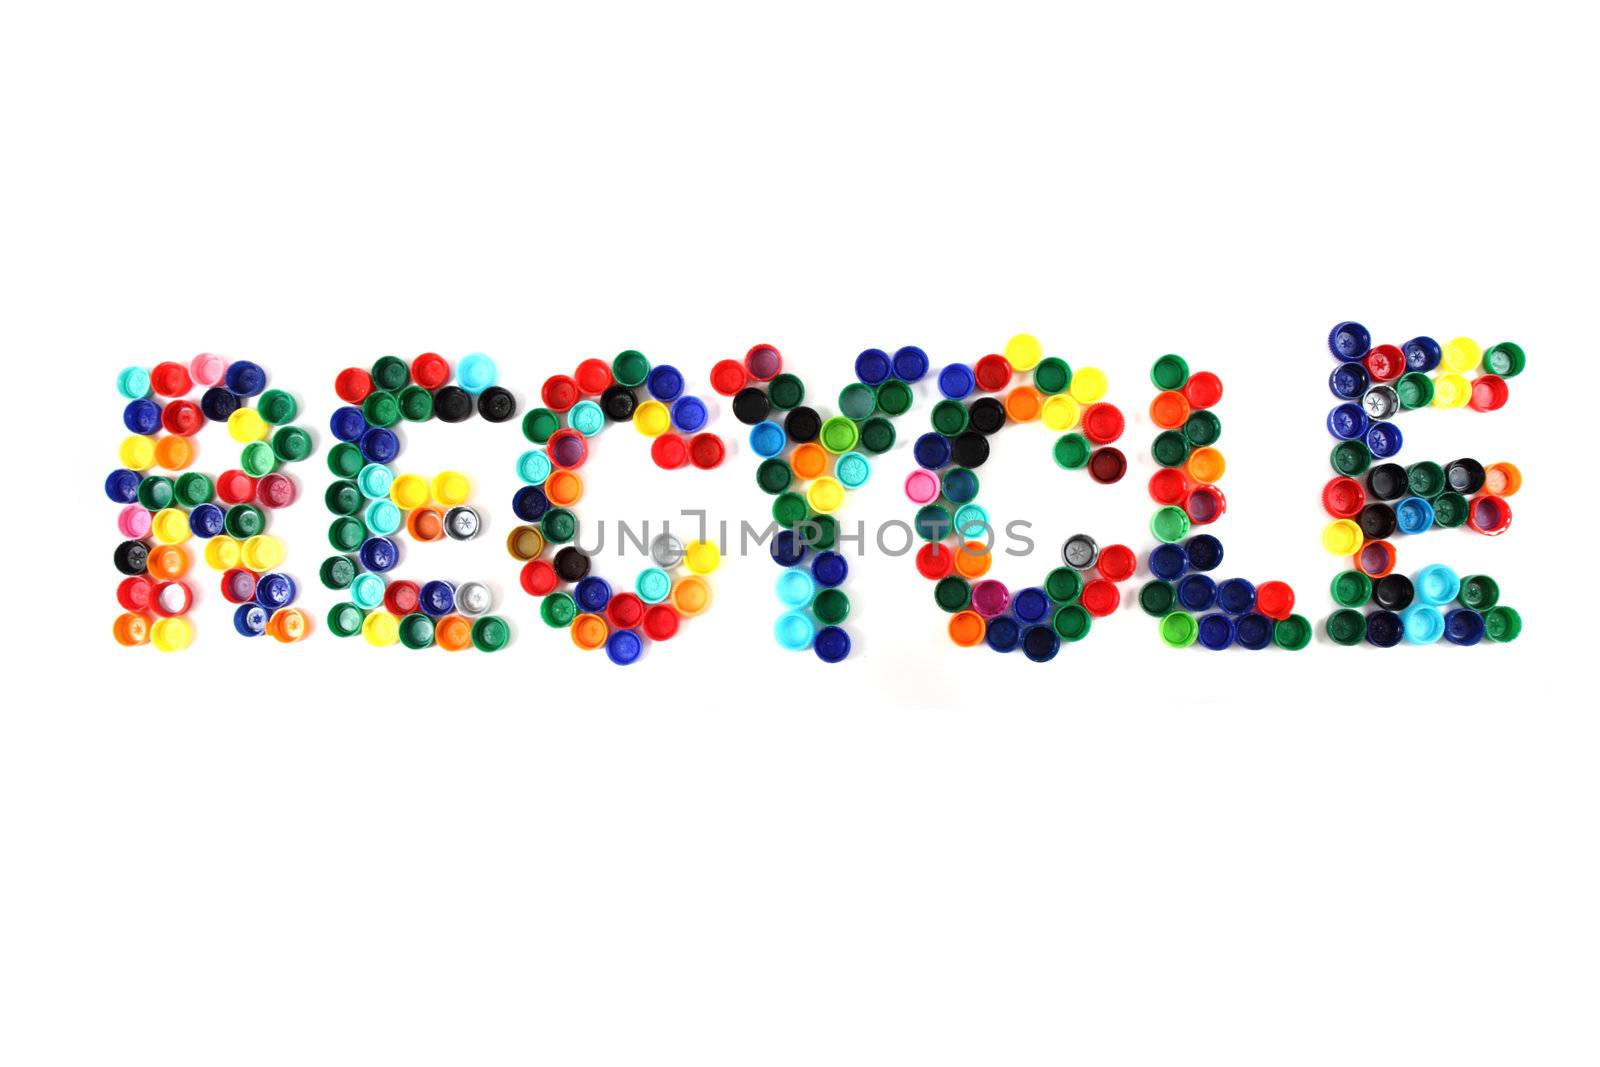 word recycle from color plastic caps by jonnysek